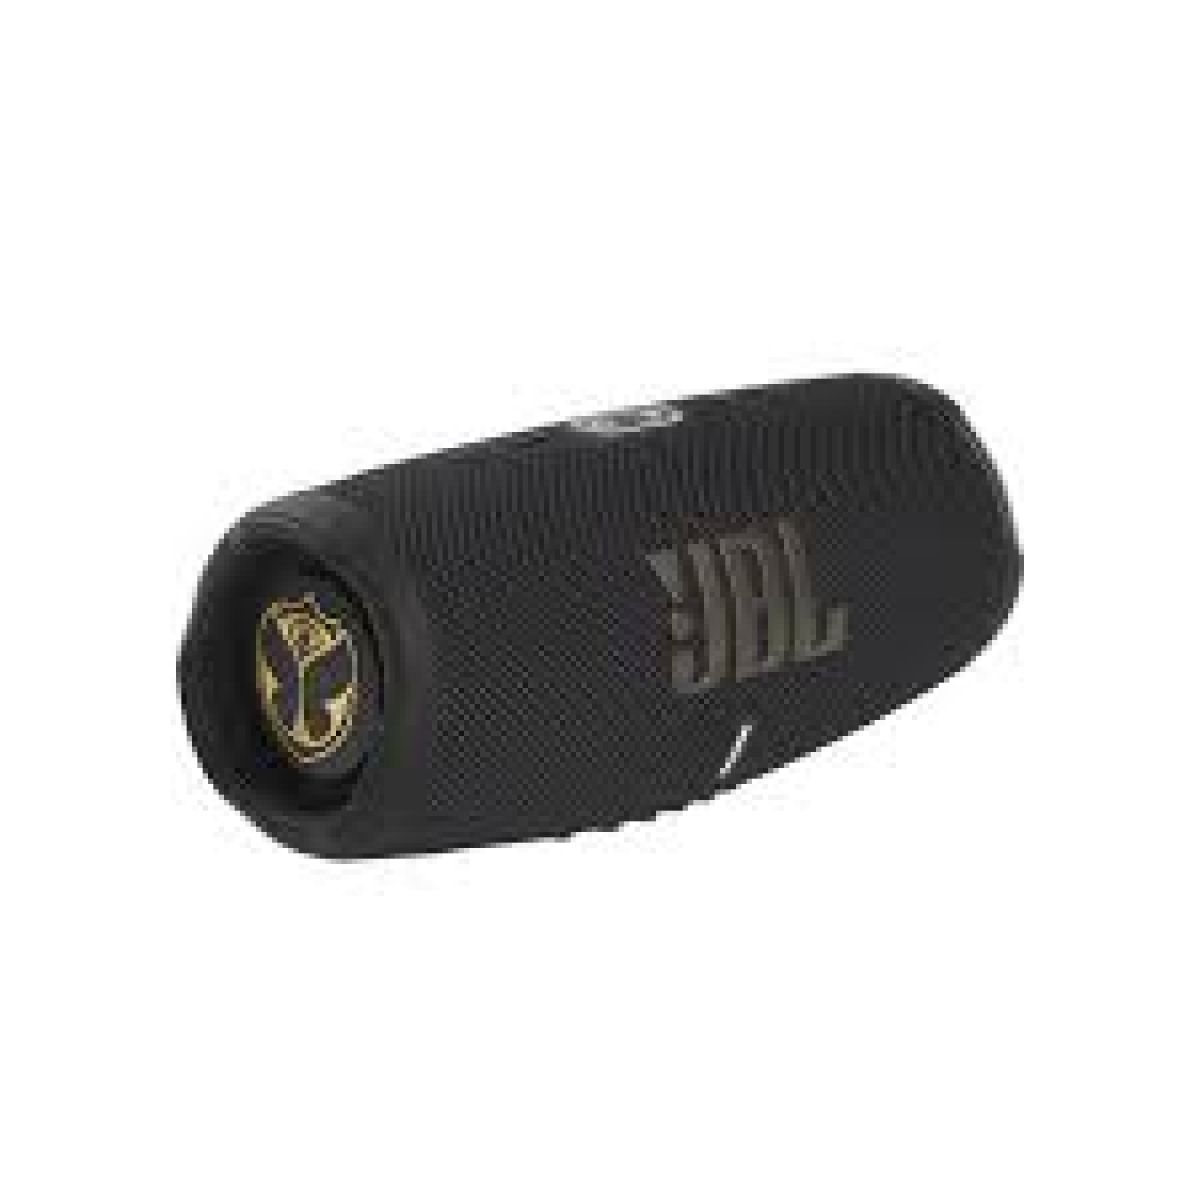 JBL Charge 5 Bluetooth Noir Type C Tomorowland Edition